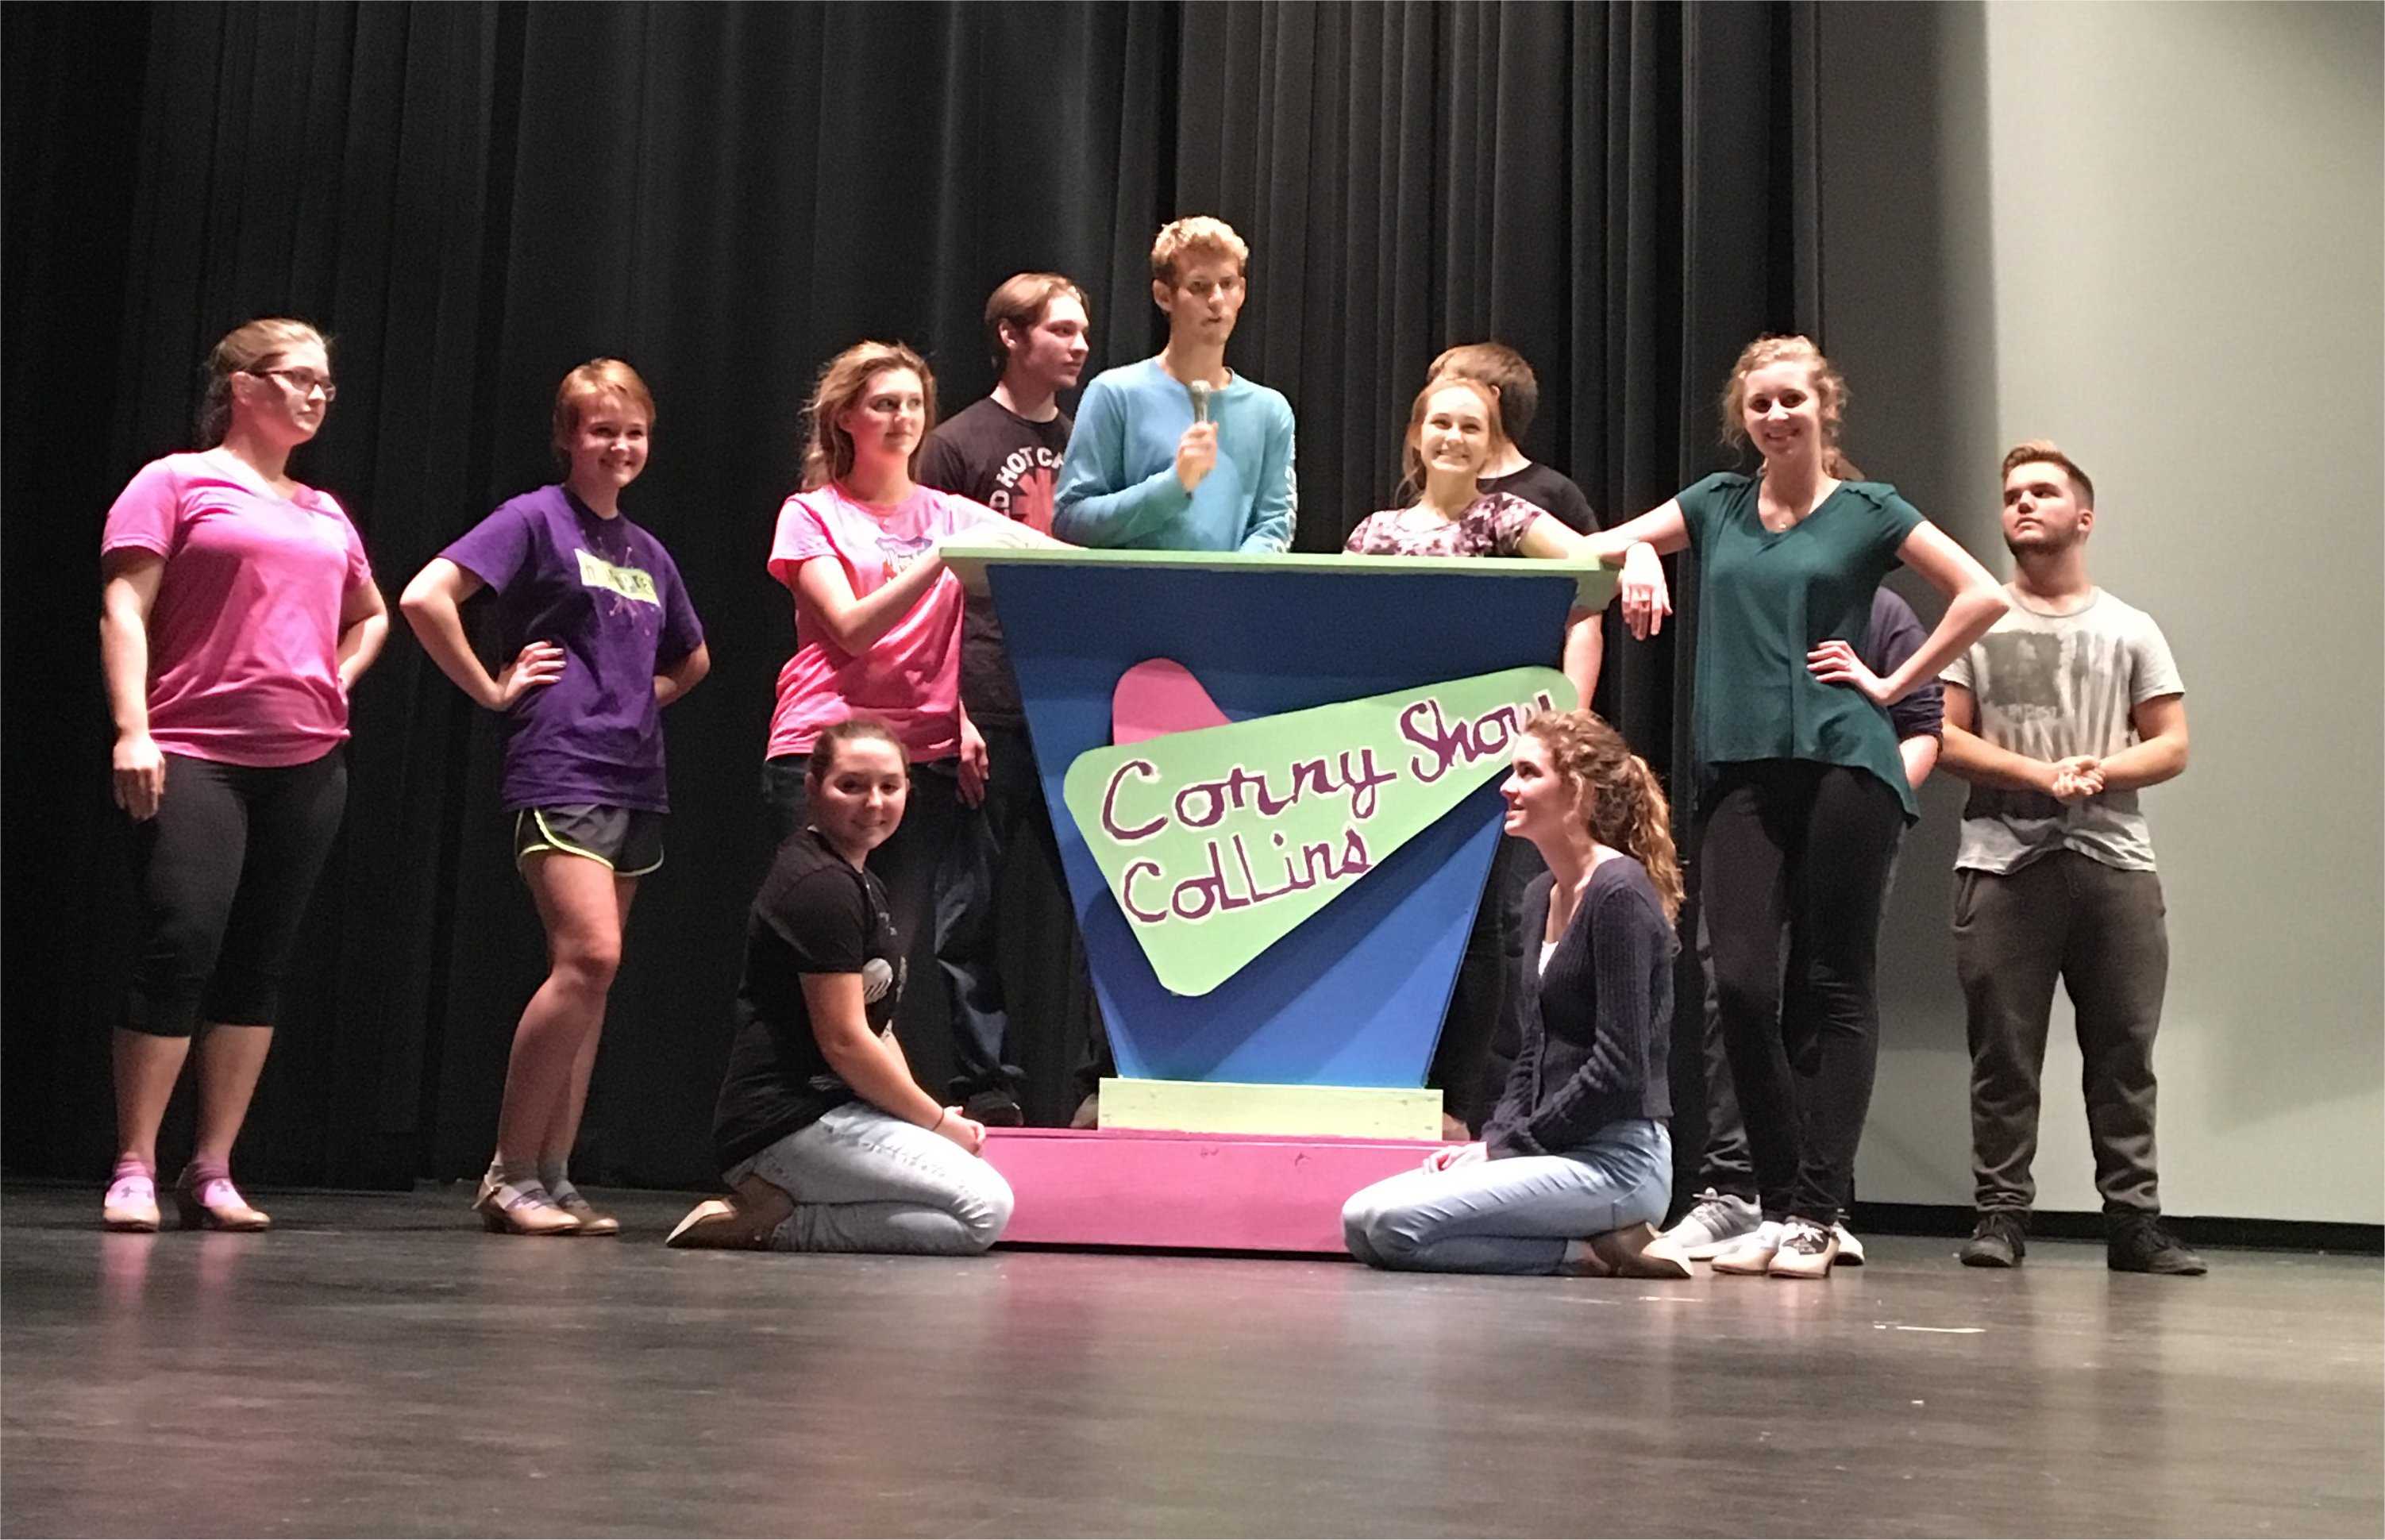 Hairspray! is the latest MVHS style – The MV Current